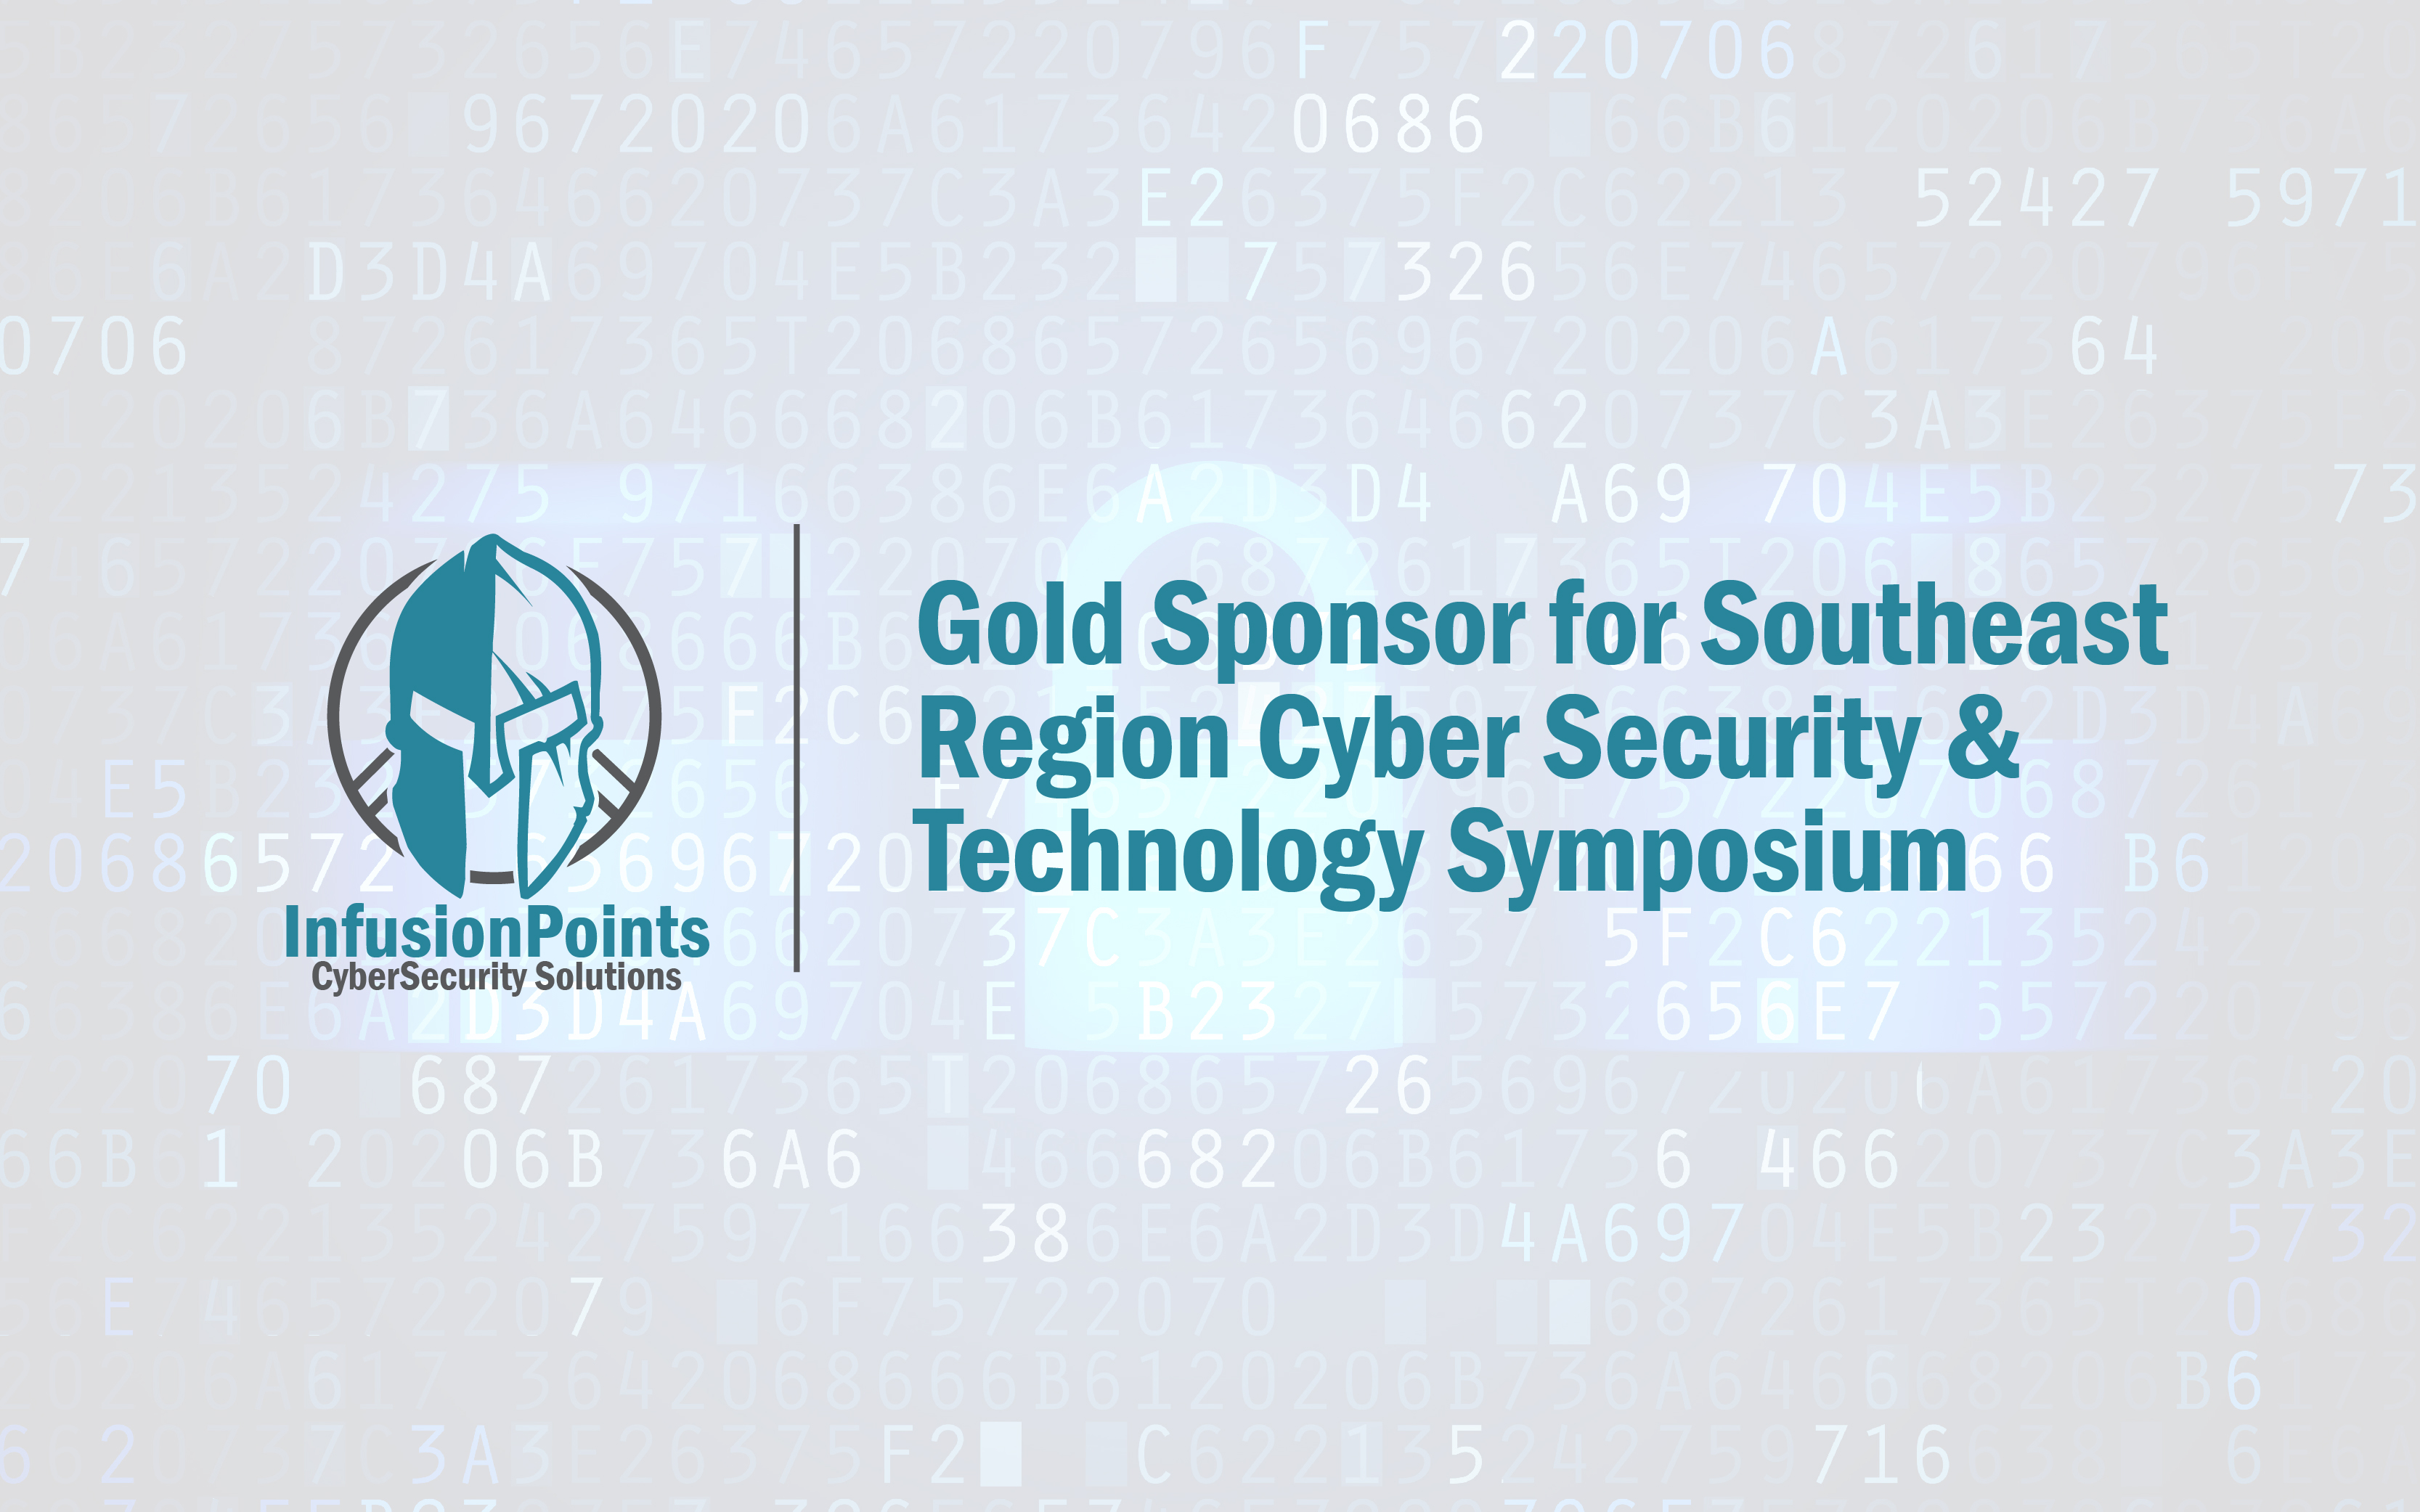 Cyber Security & Technology Symposium